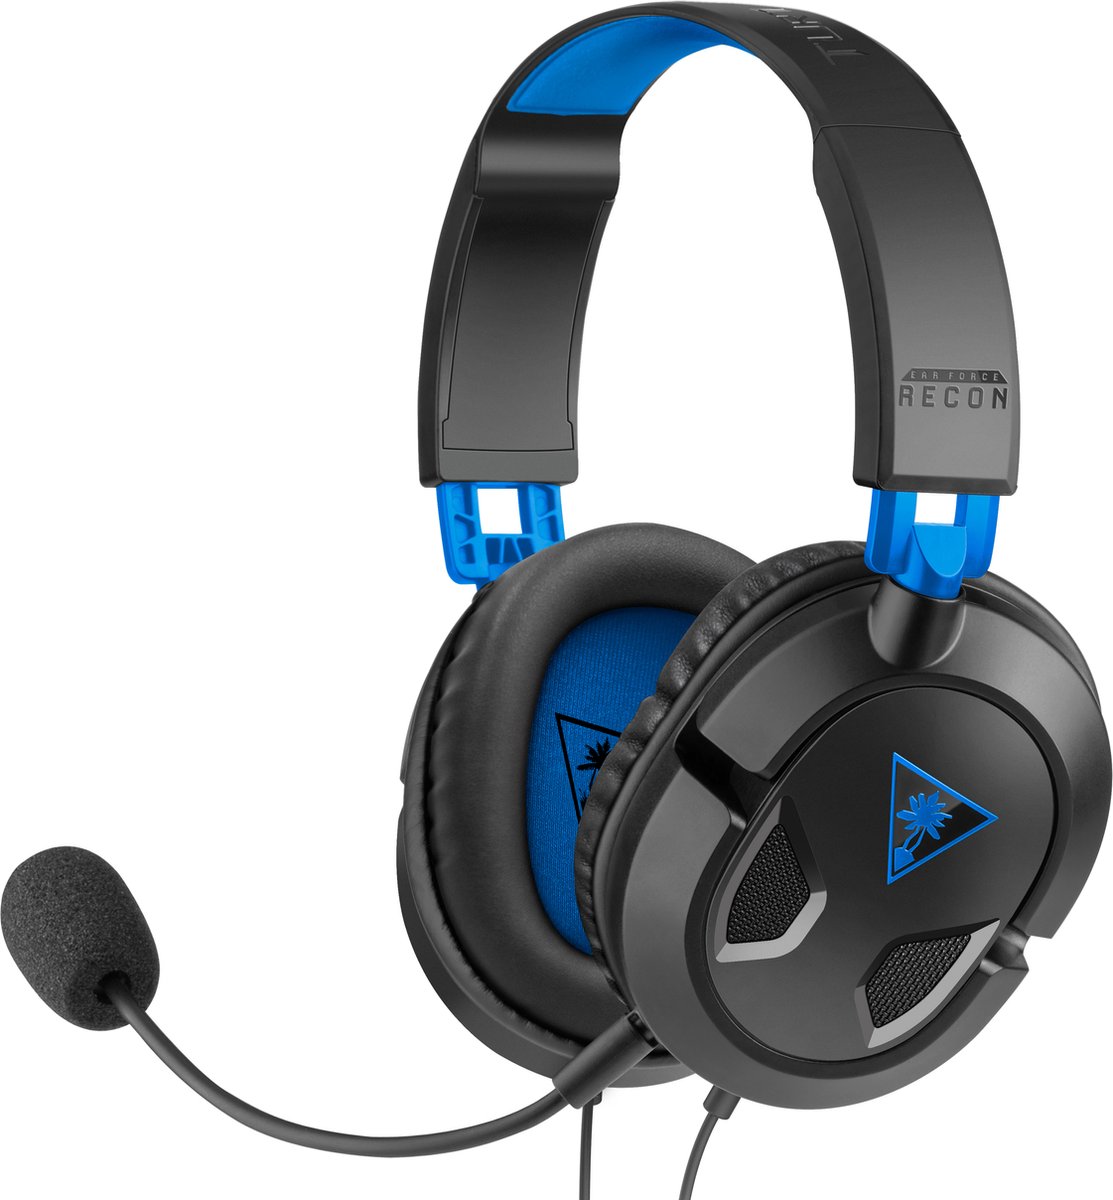 Turtle Beach Ear Force Recon 50P - Gaming Headset - PS4 & PS5 - Turtle Beach